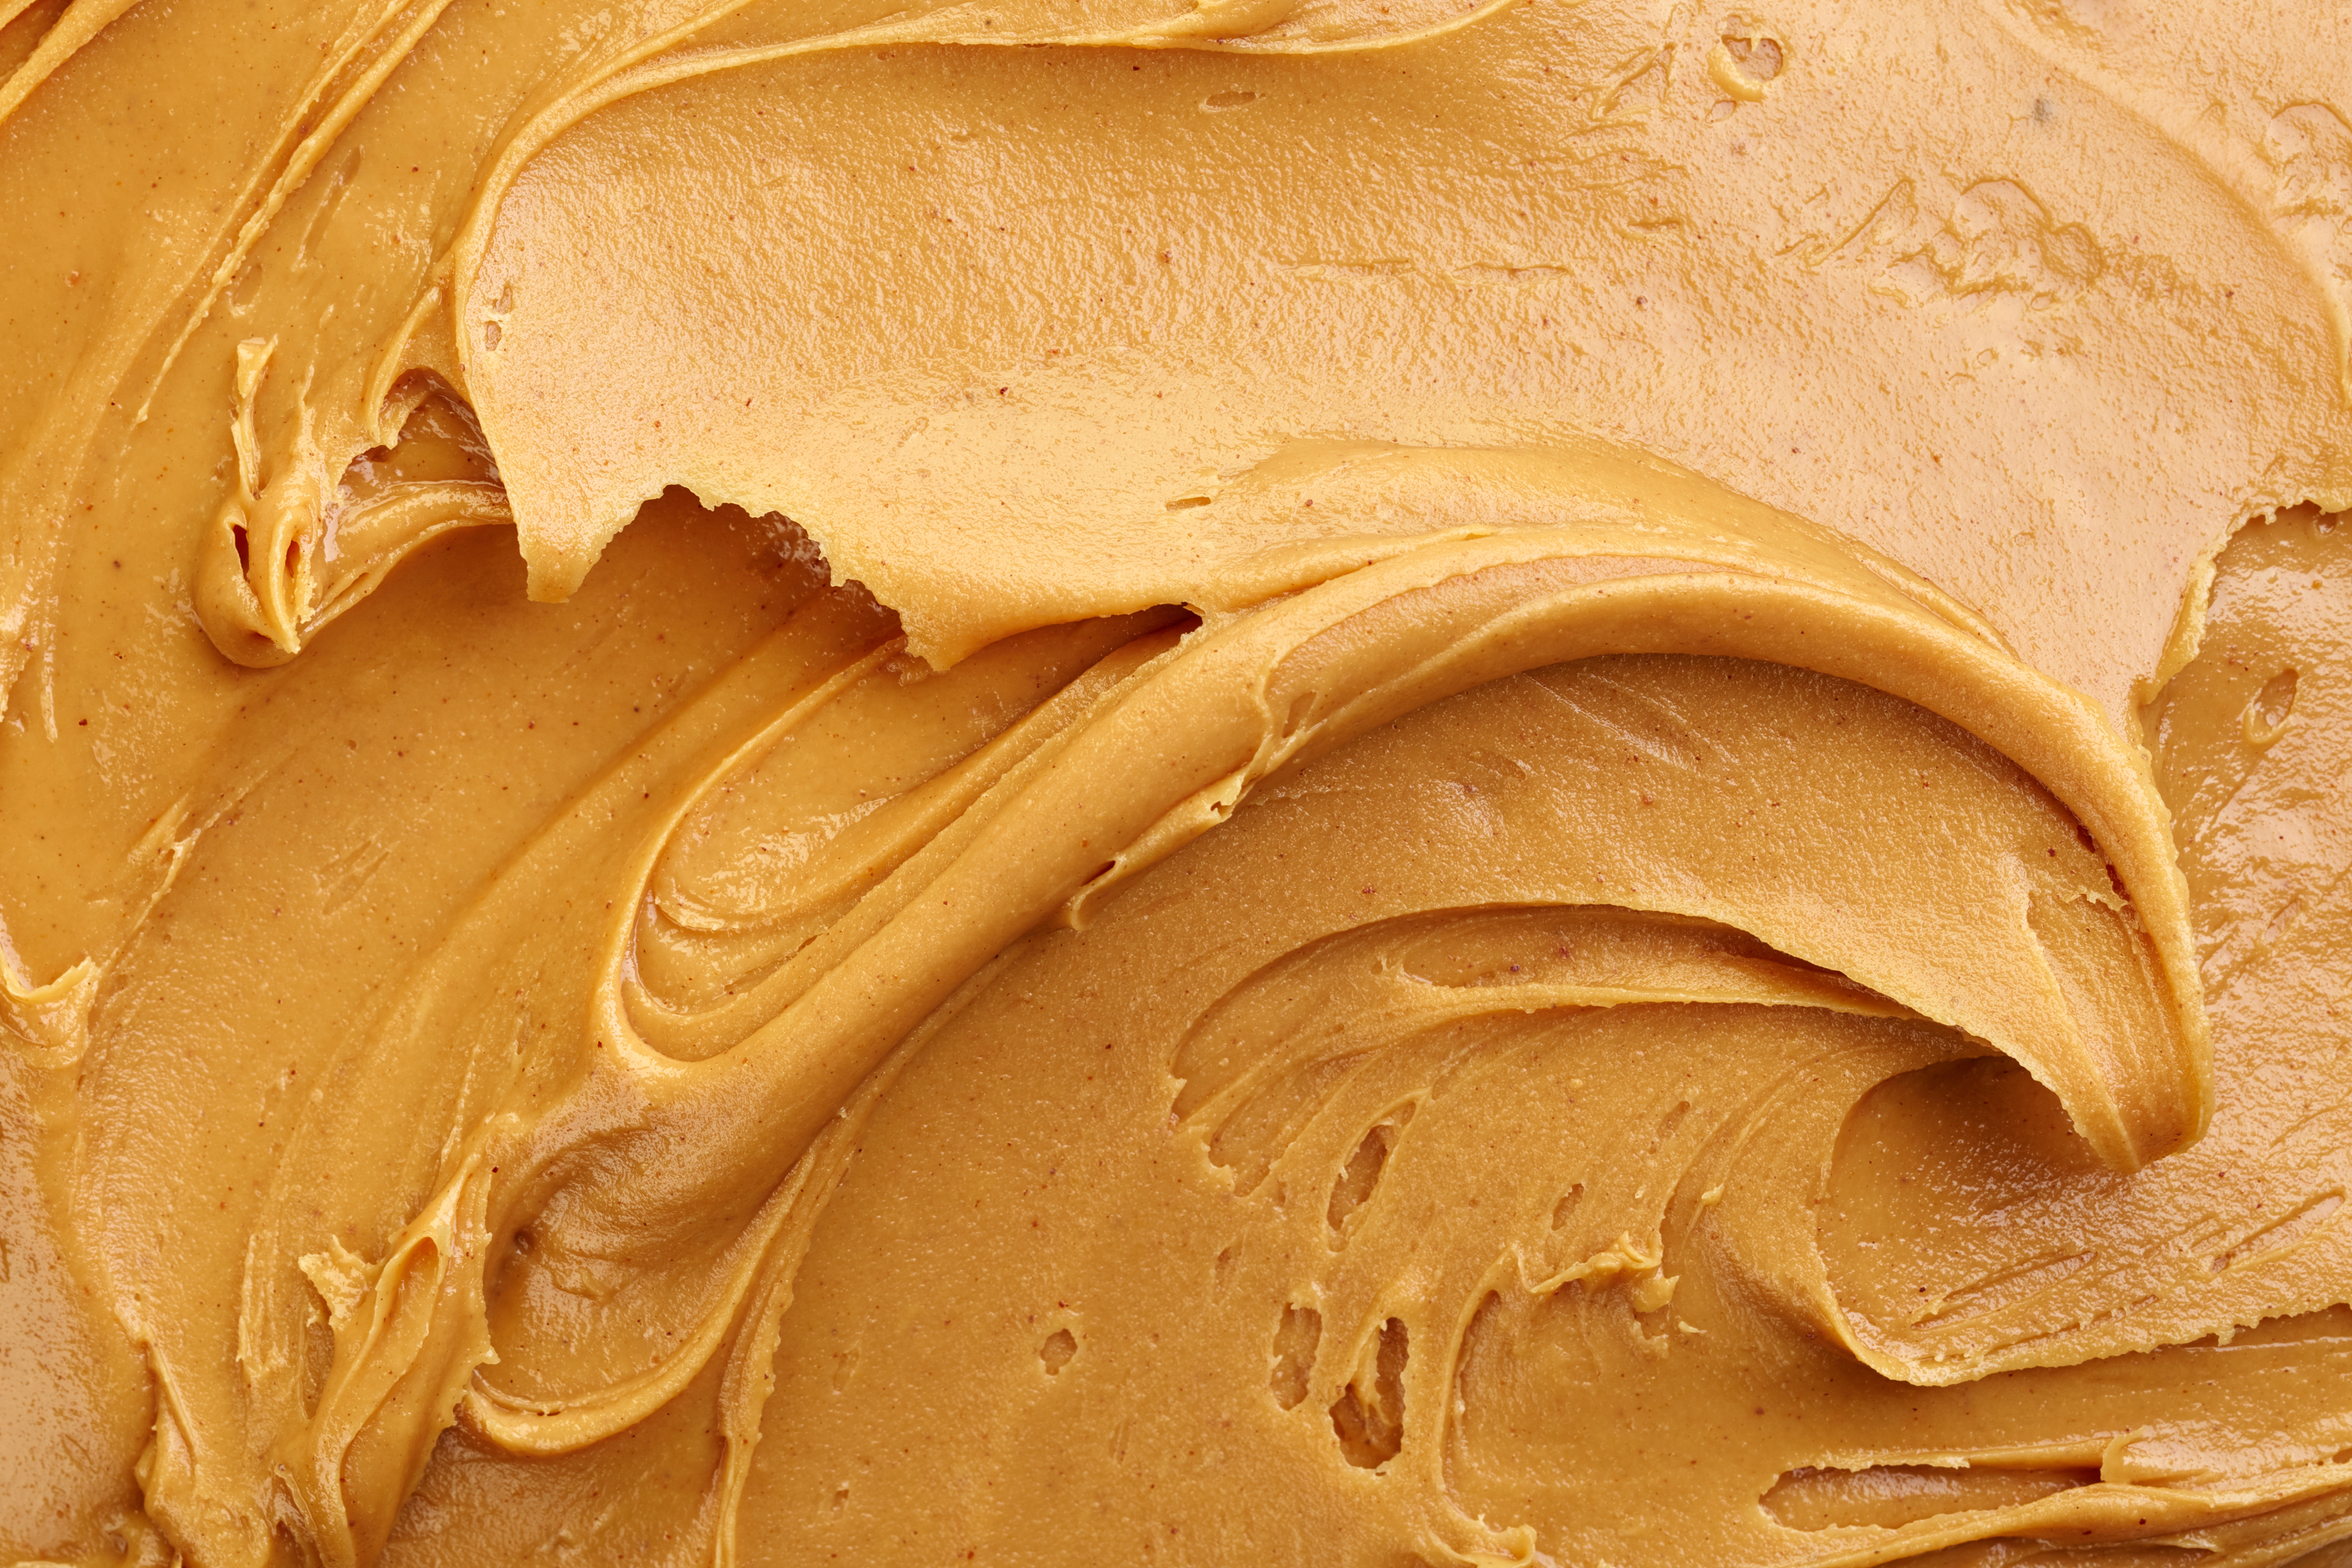 Is Peanut Butter Good for You? Nutrition and Health Benefits